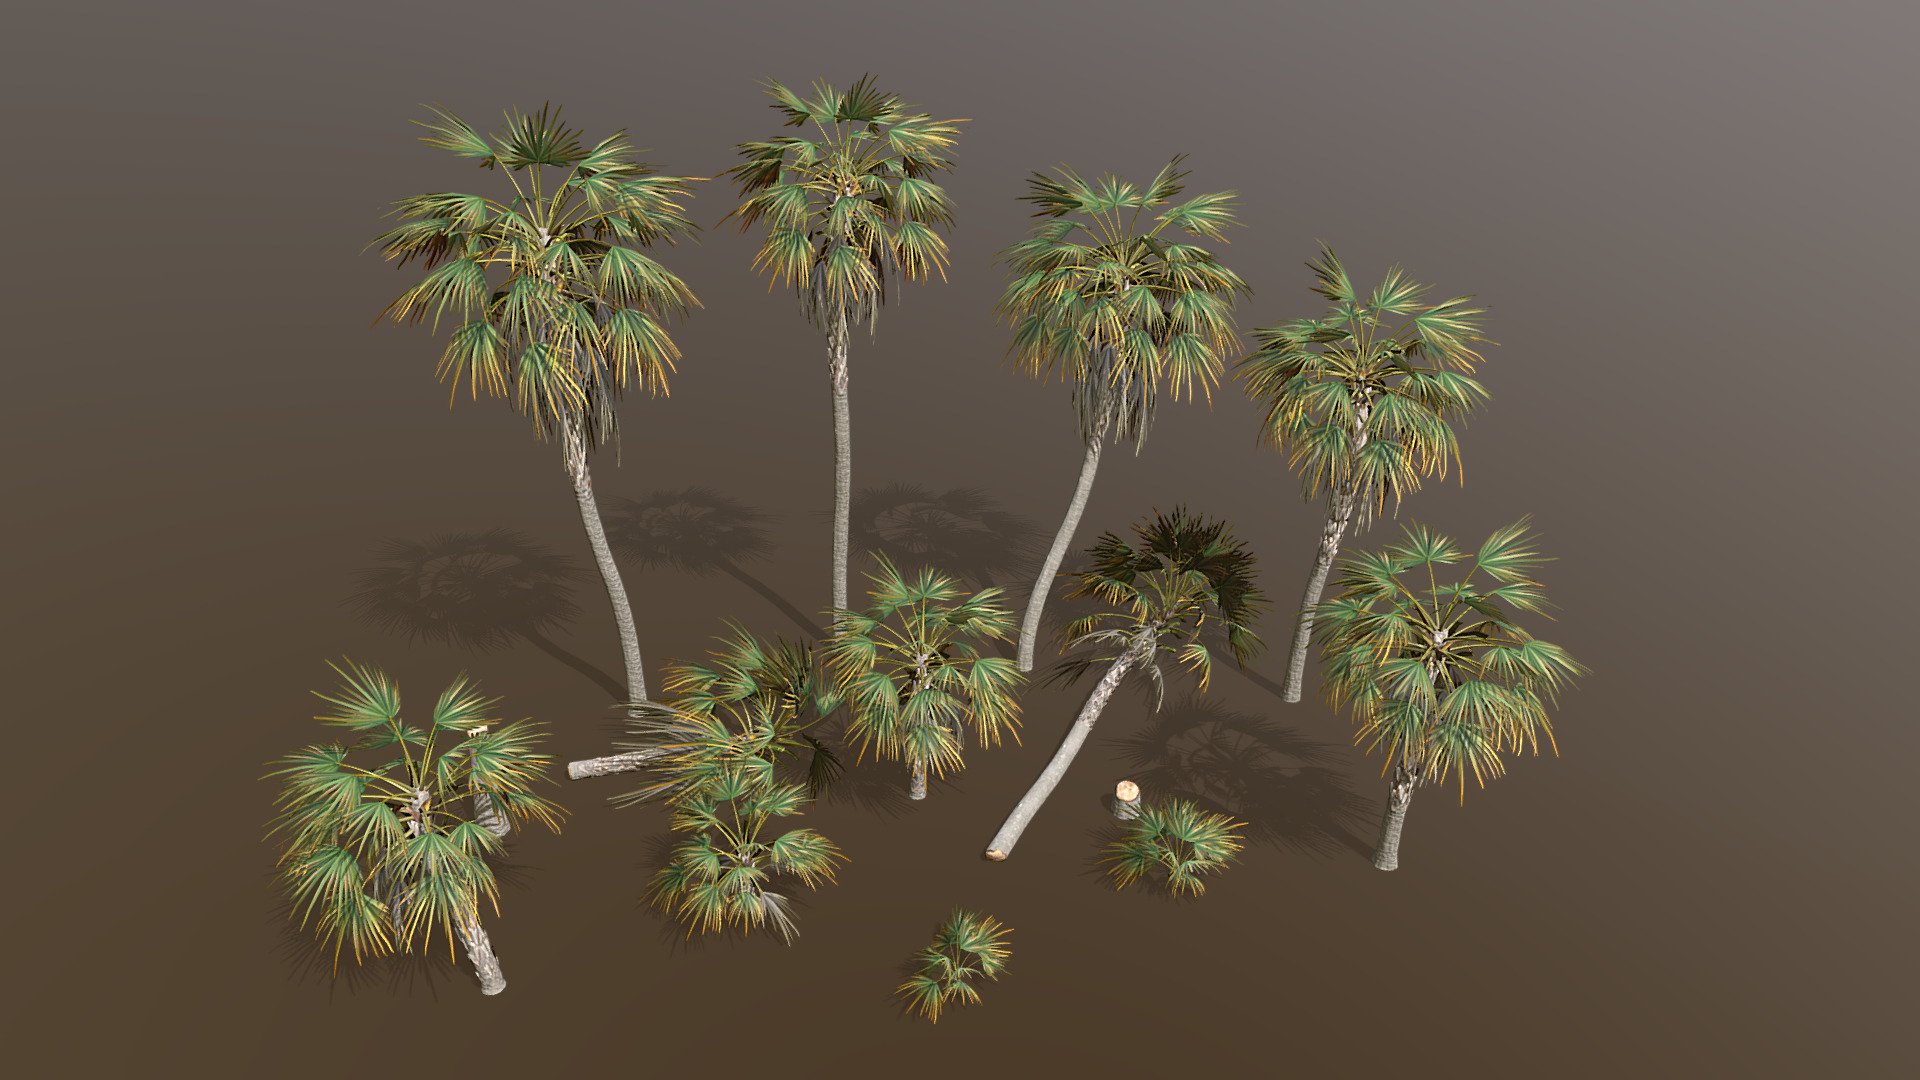 NOTE: This tree pack is free with Tree It steam edition.

Key Thatch Palm Pack created in treeit.

Please check out my free models on my sketchfab profile made in treeit for compatibility.

Includes 14 diffrent models.

Each modle has the main model + 5 levels of detail, last LOD is an 8 poly imposter/billboard.

Exported to .fbx .obj .dbo

fbx/dbo format includes vertex colors for vertex shader wind animation.

Includes the tree it .tre project.

Texture size is 2k x 2 3d model